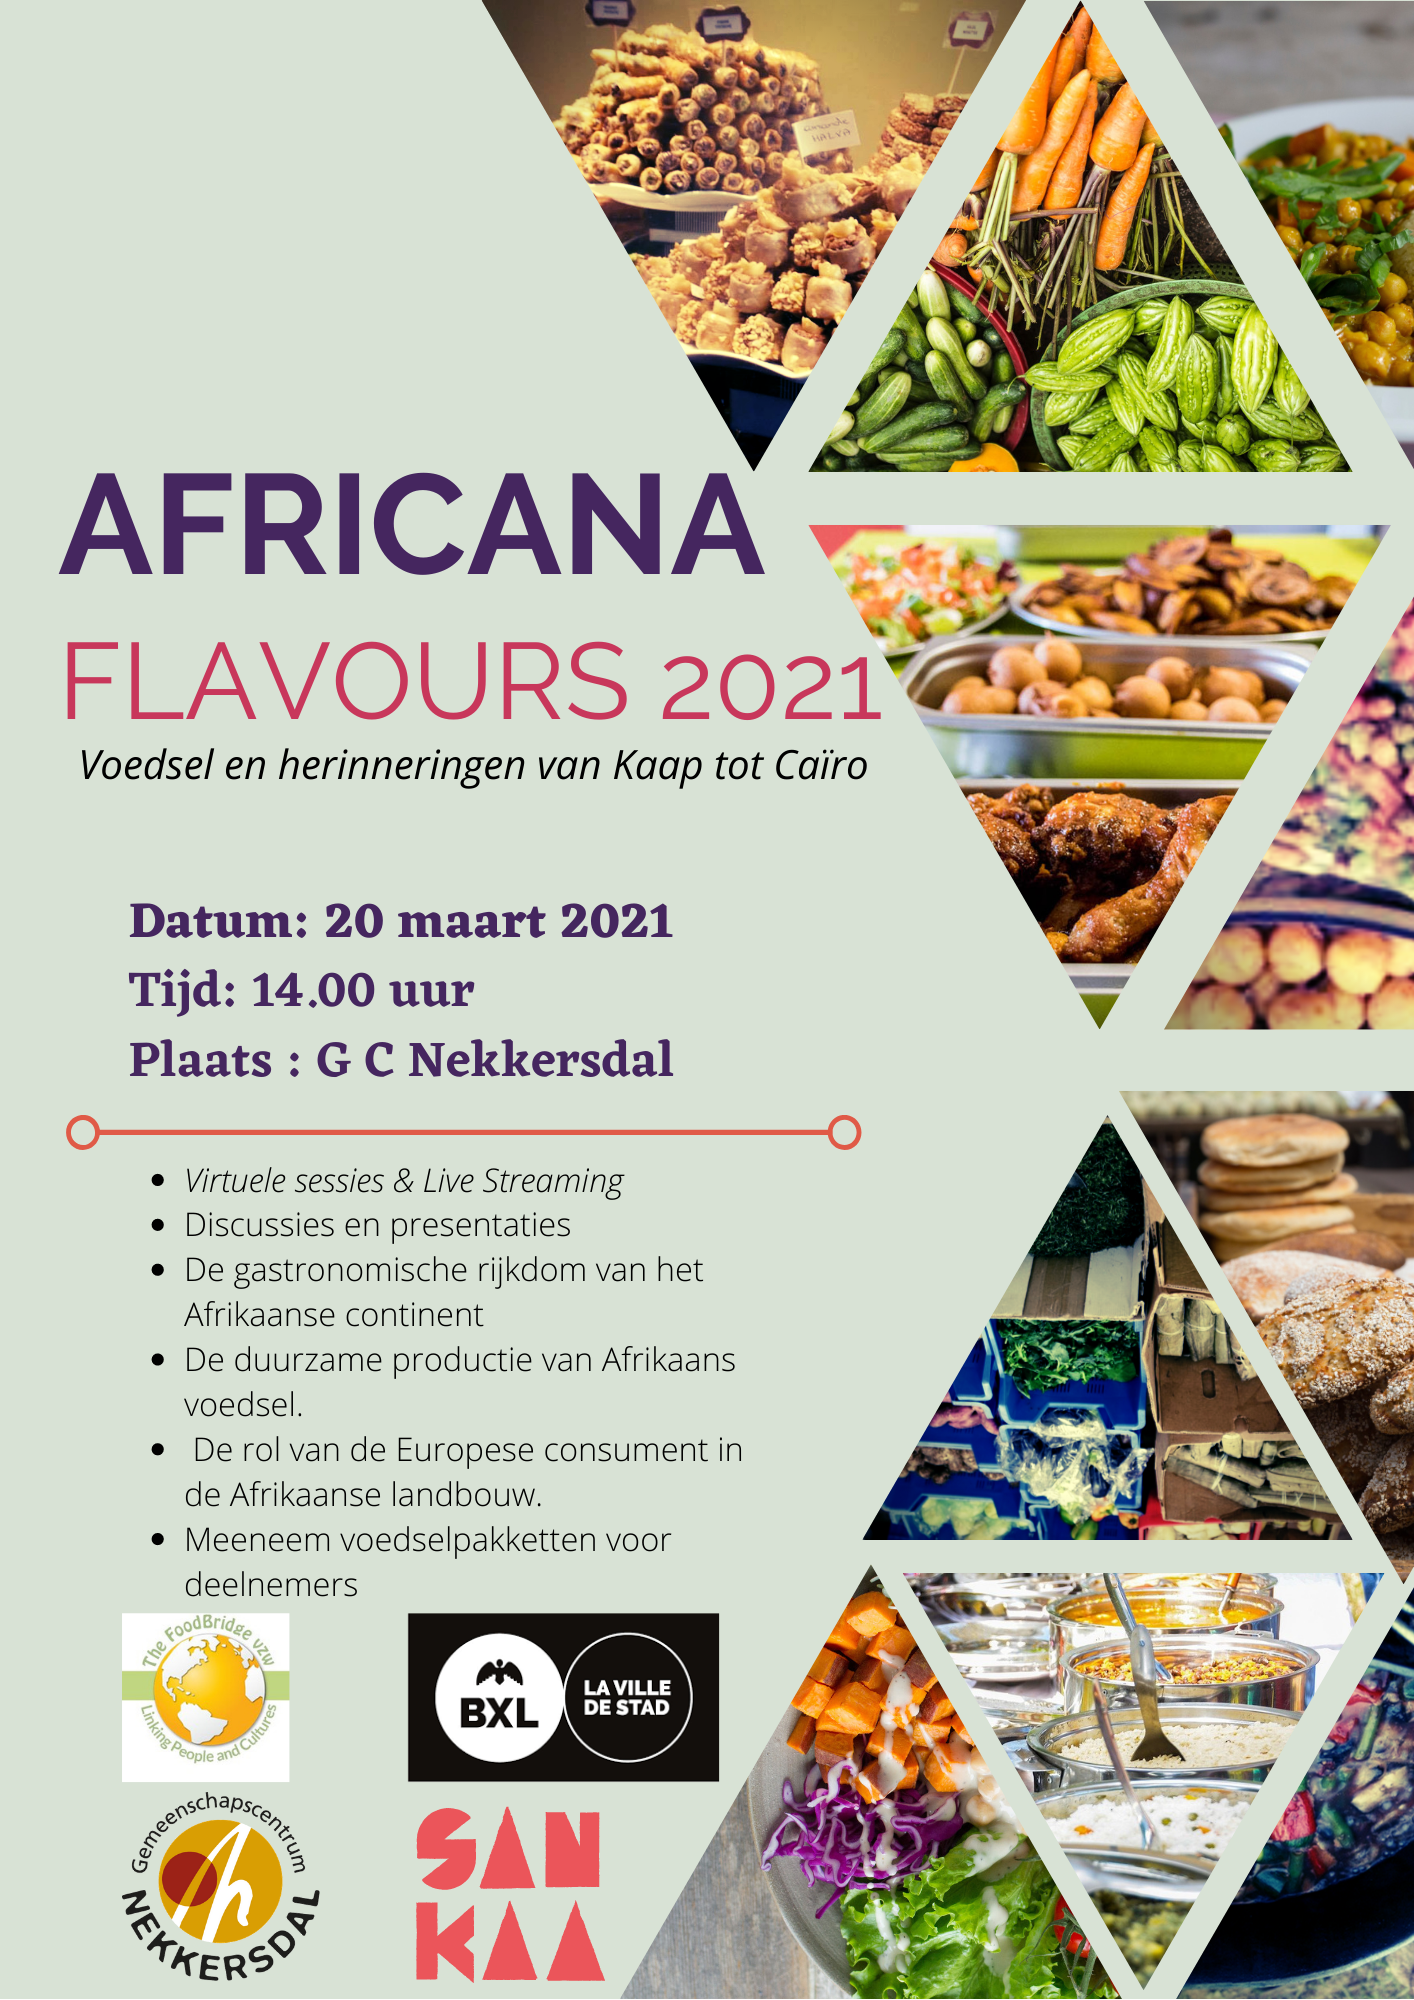 Africana Flavours 2021 with Logos